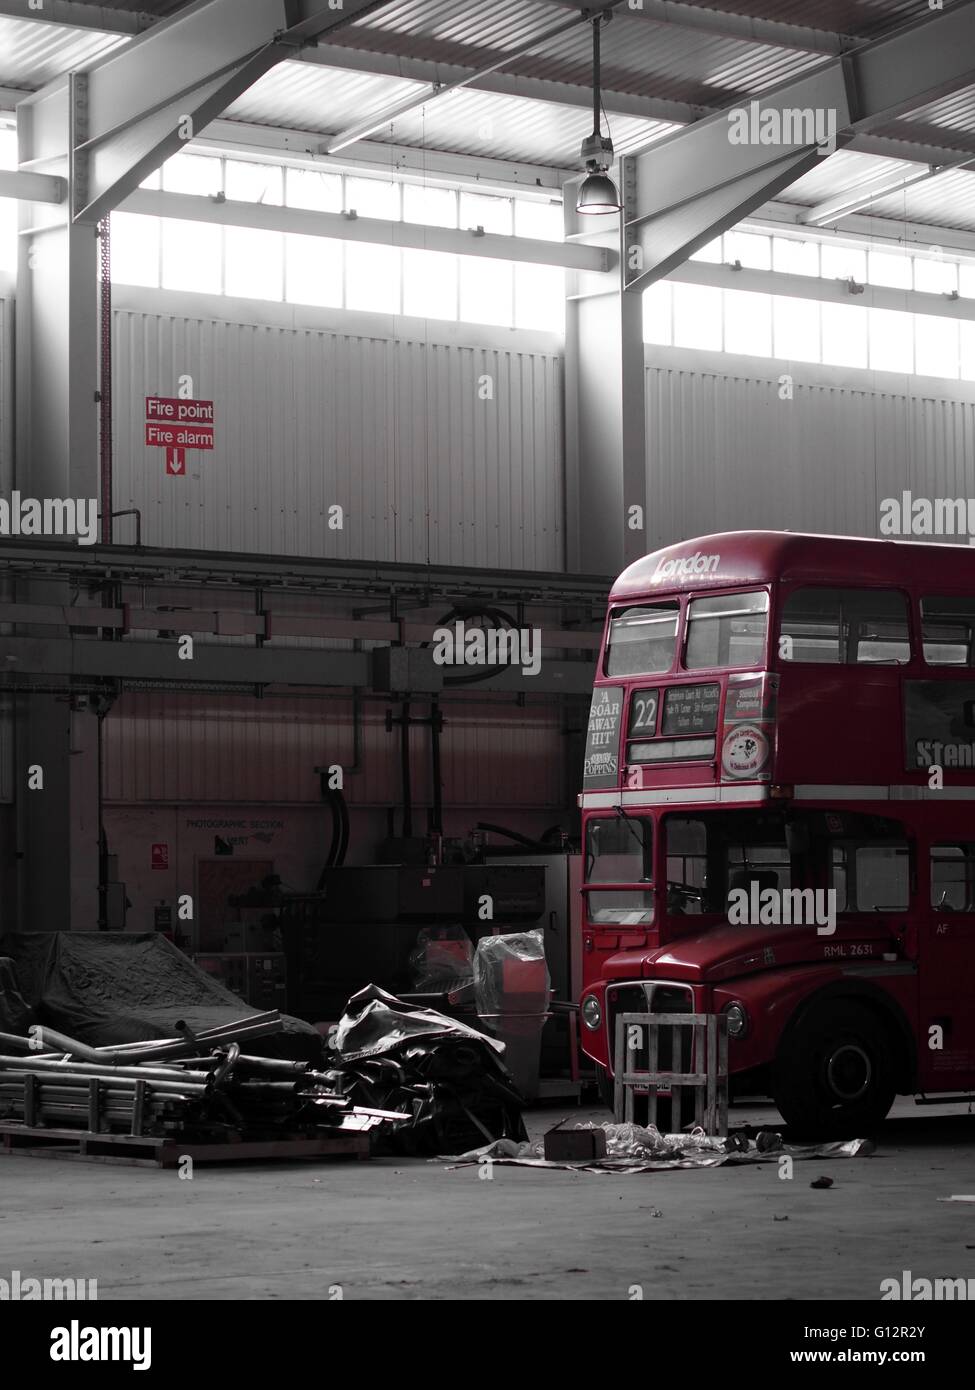 London Routemaster Bus abandoned in a hangar surrounded by junk Stock Photo